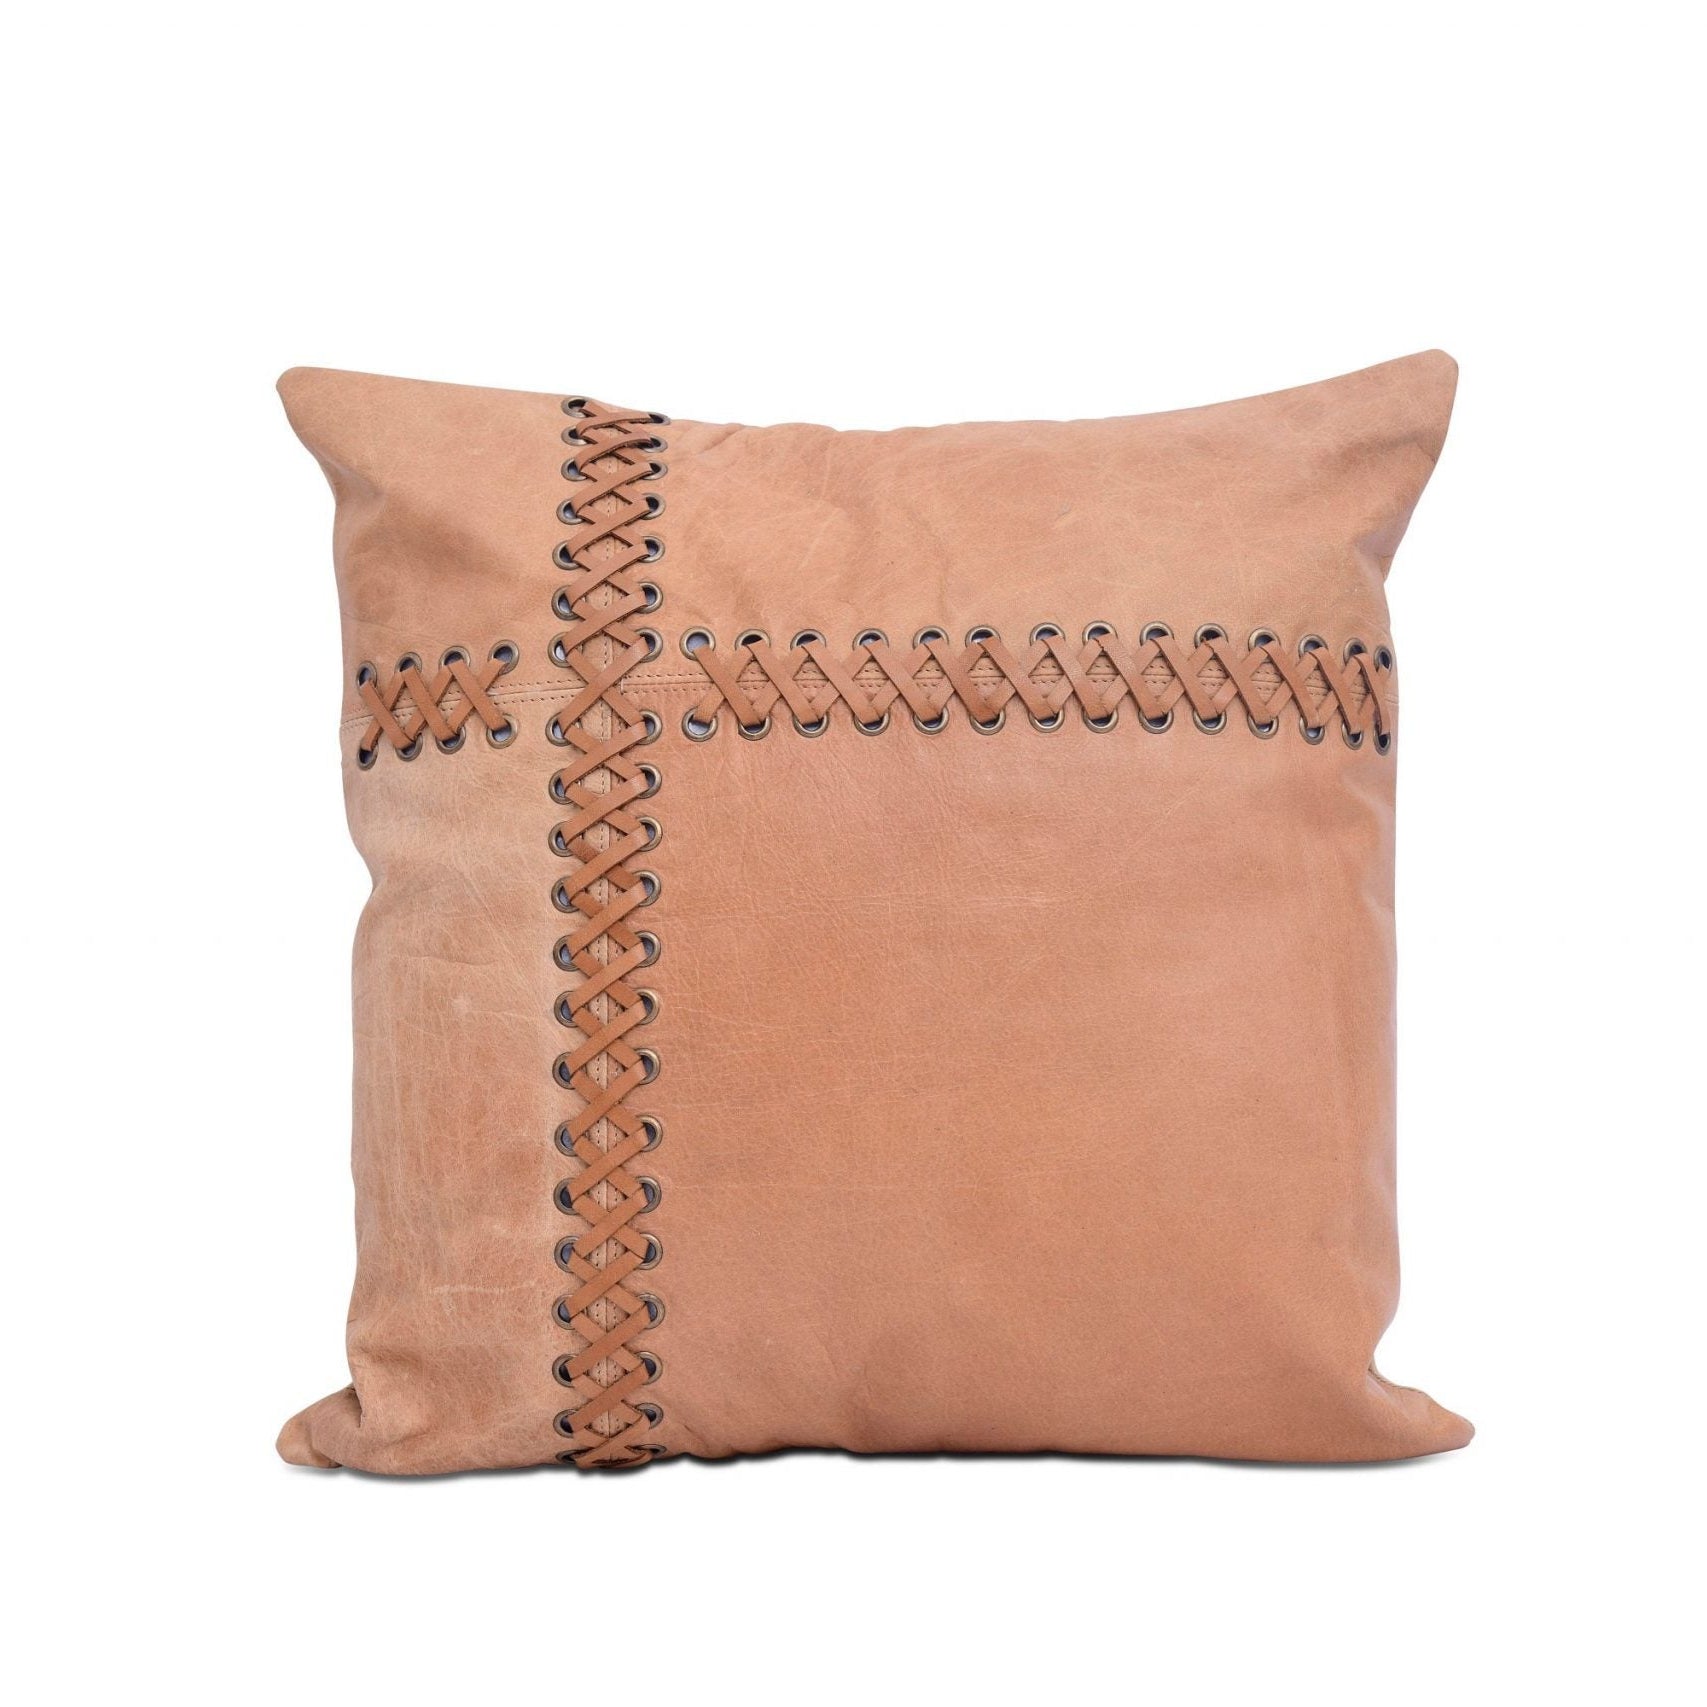 Melbourne Leather Co Genuine Leather Cushion Cover Pillow Cover Leather Pillow Leather Cushion Vintage Leather Tan Pillow Cover